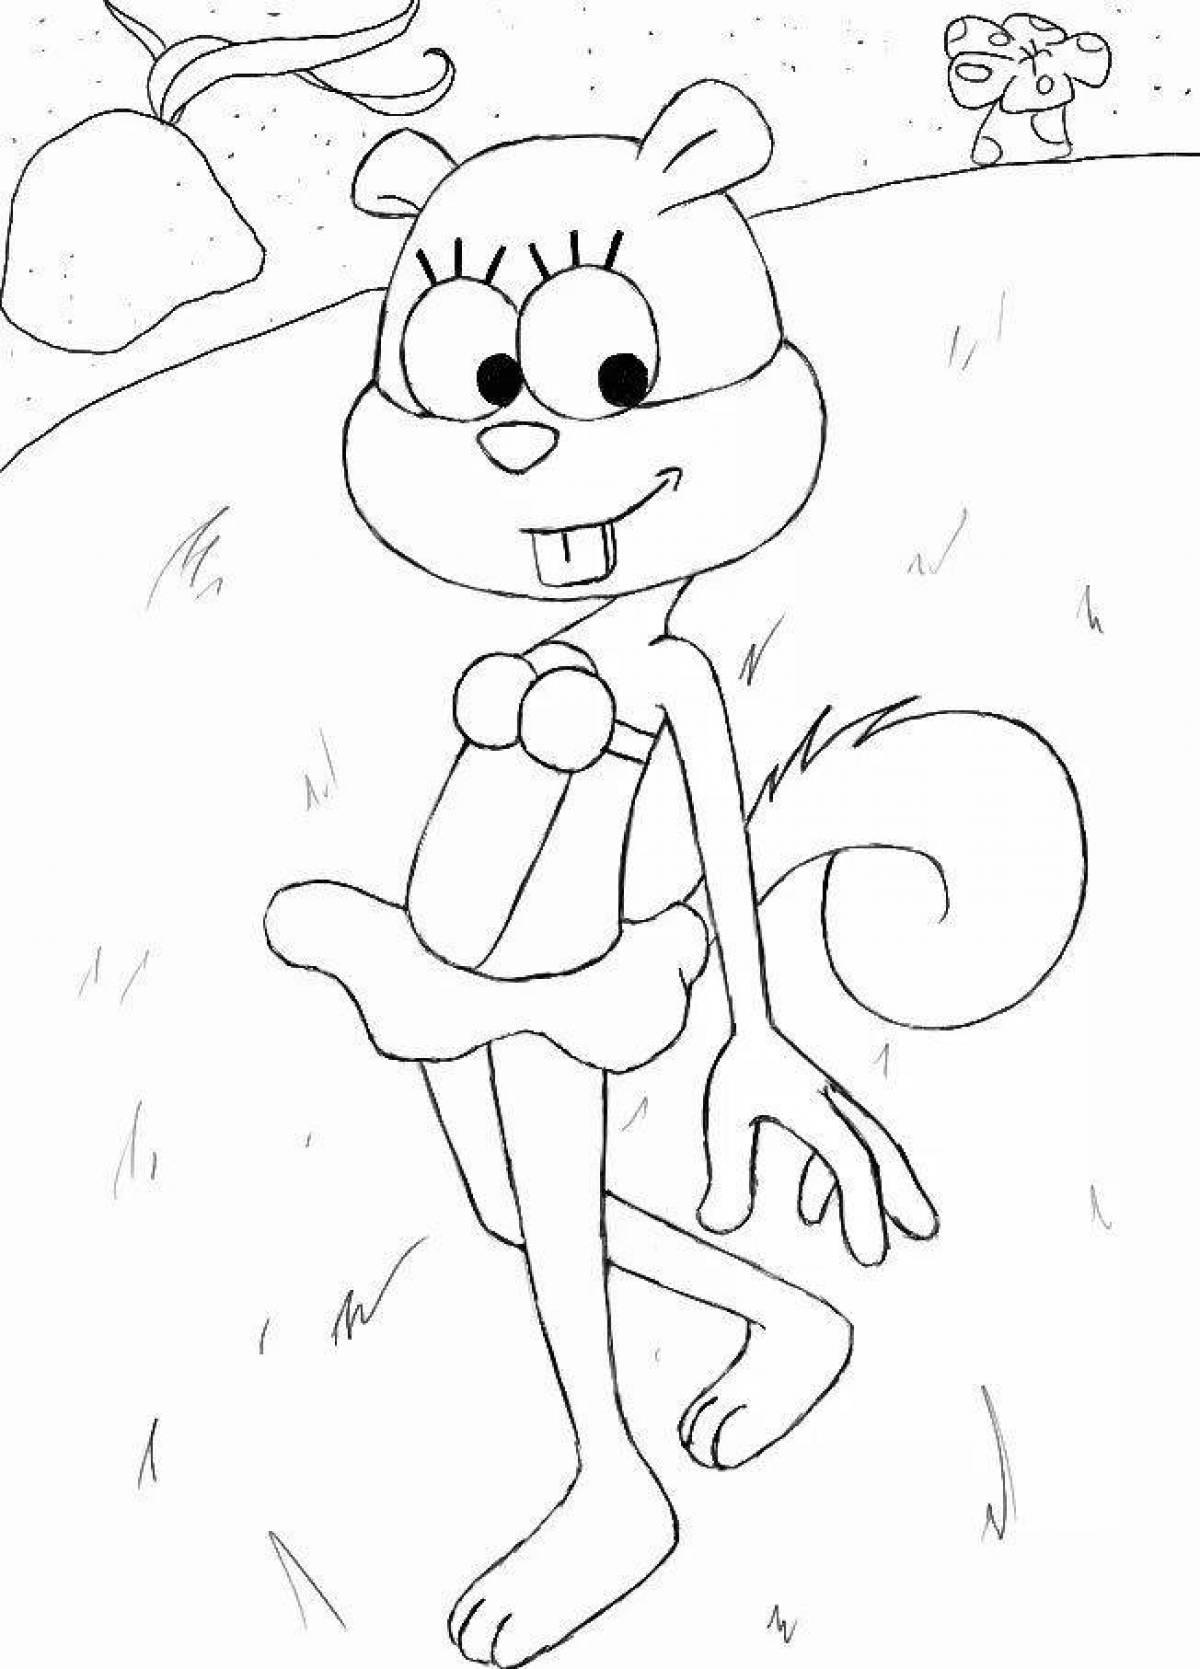 Sandy's animated coloring page